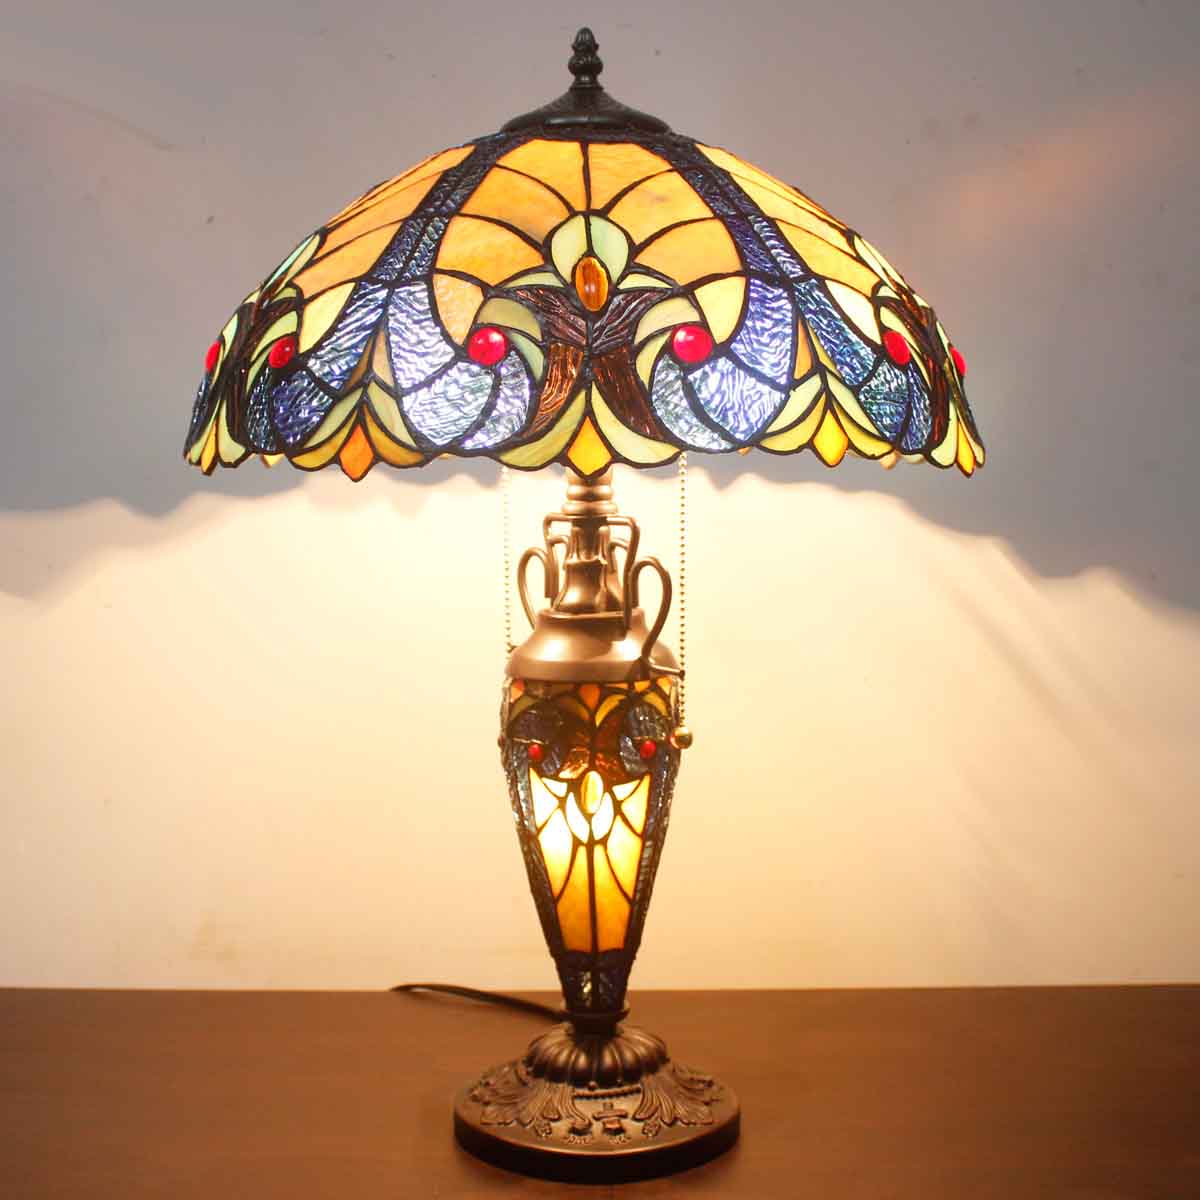 Tiffany Table Lamps Werfactory® Yellow Stained Glass Liaison Lampshade Reading Light